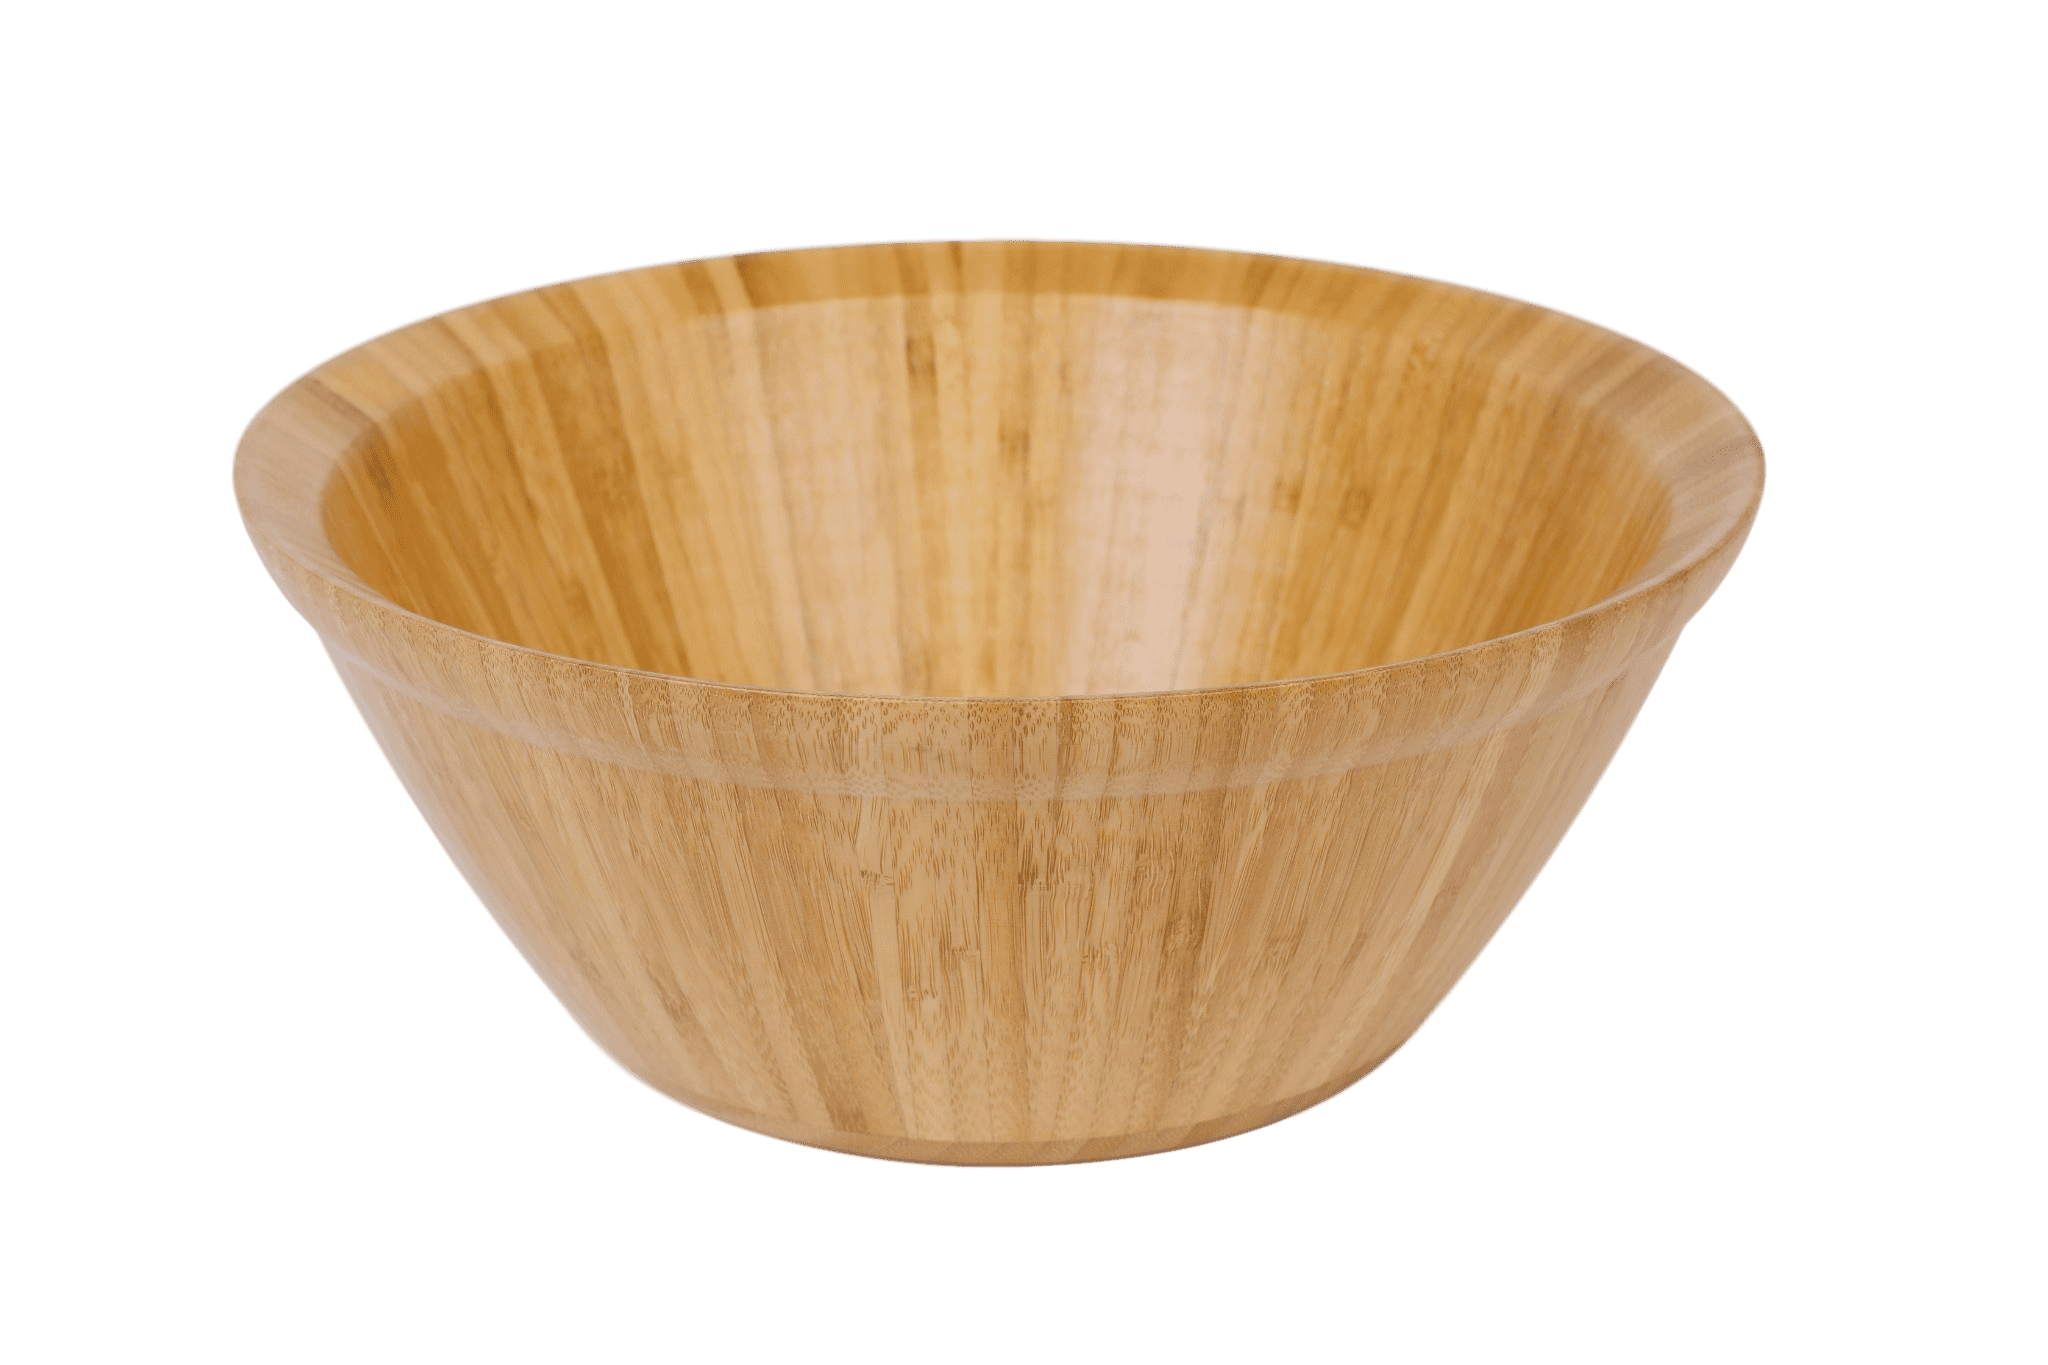 Winware by Winco Woven Wooden Salad Bowl Size 6" x 1-1/2" 